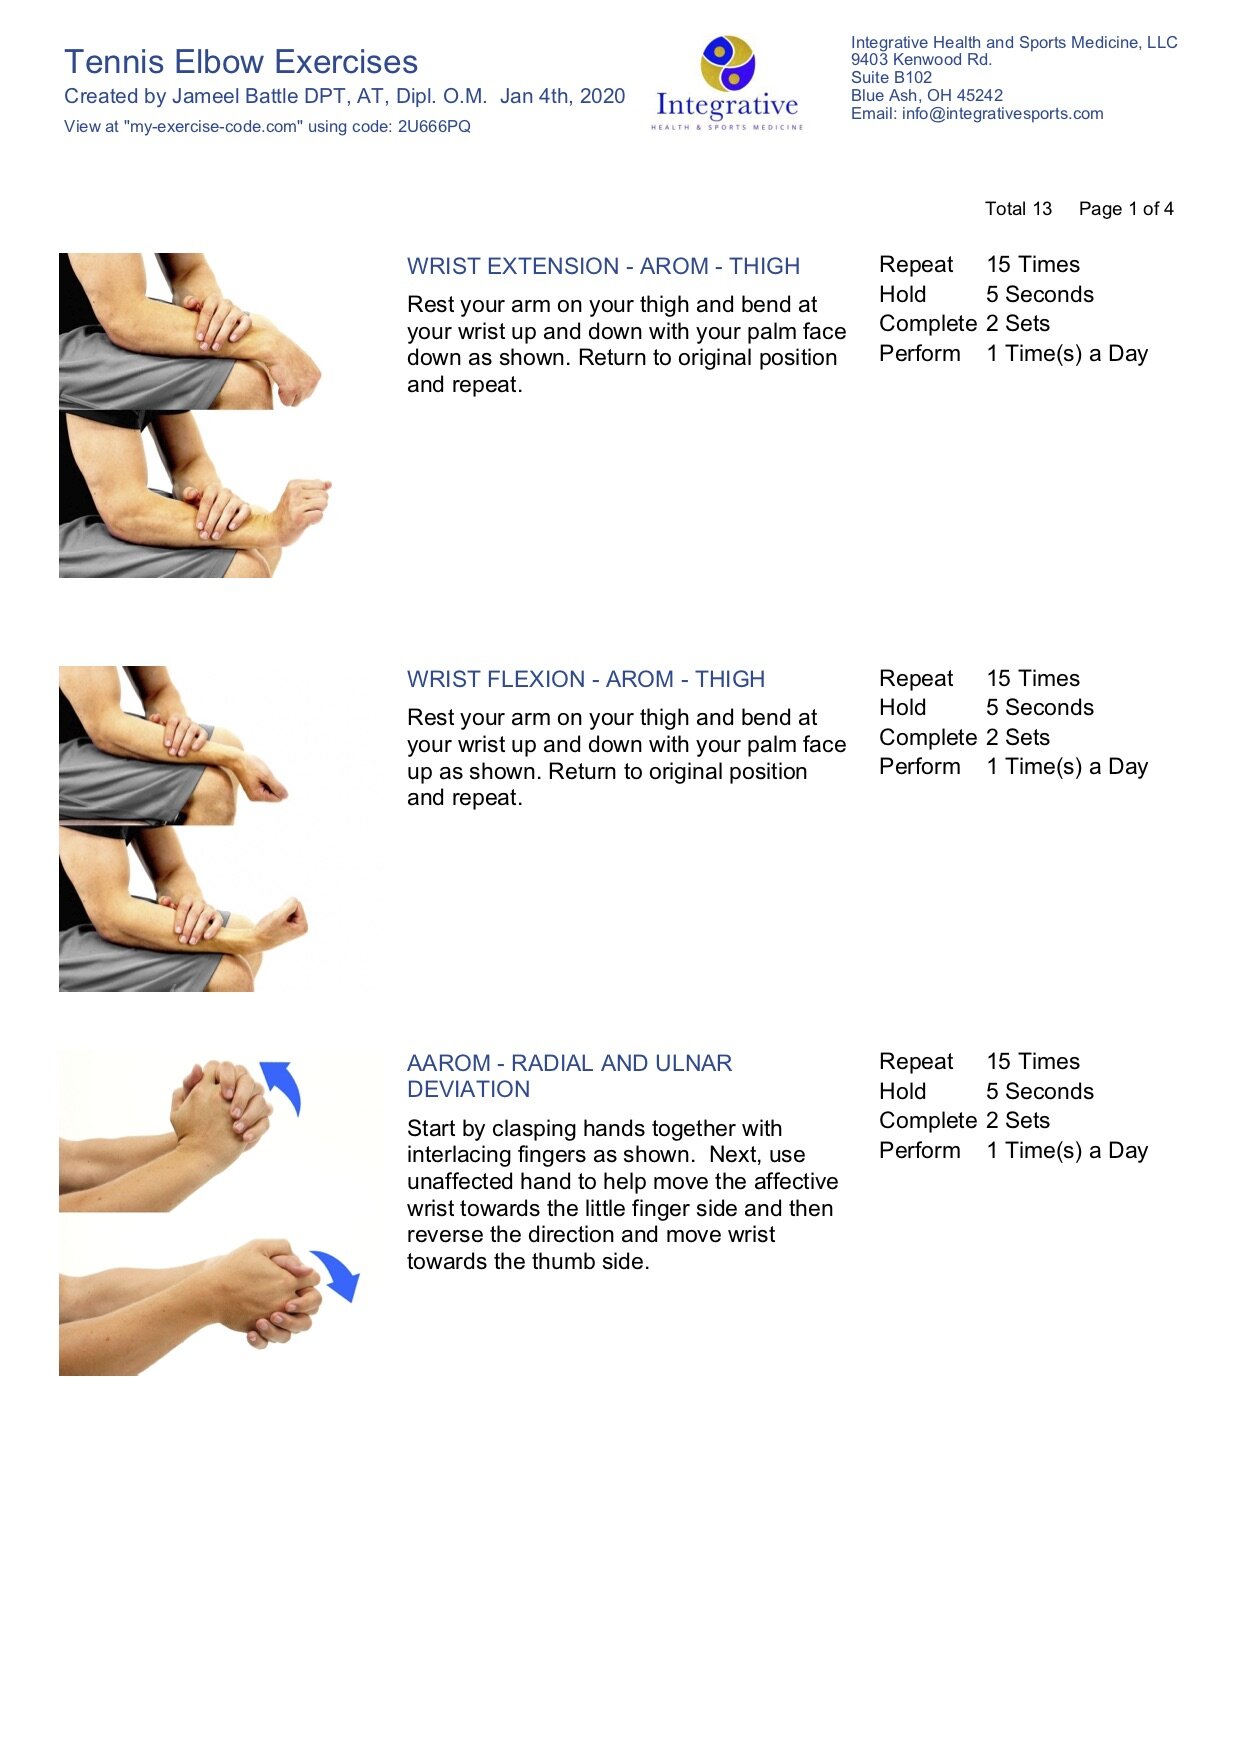 Home Exercise Program for Tennis Elbow (Lateral Epicondylagia) — Integrative Health + Sports Medicine